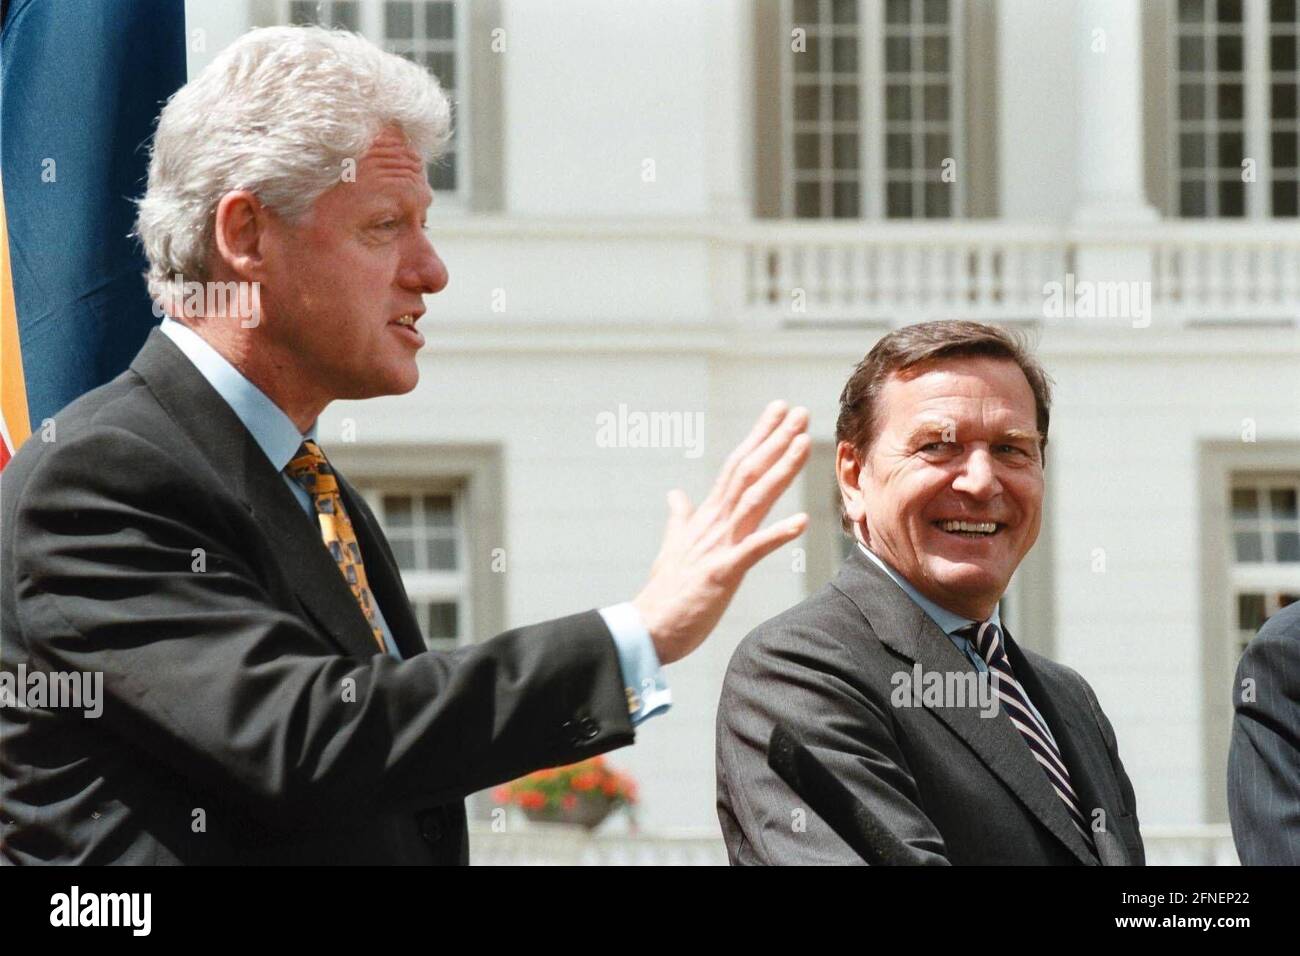 Bill Clinton, President USA and Chancellor Gerhard Schröder during a press conference on the United States-European Union summit in the garden of the Federal Chancellery in Bonn. [automated translation] Stock Photo